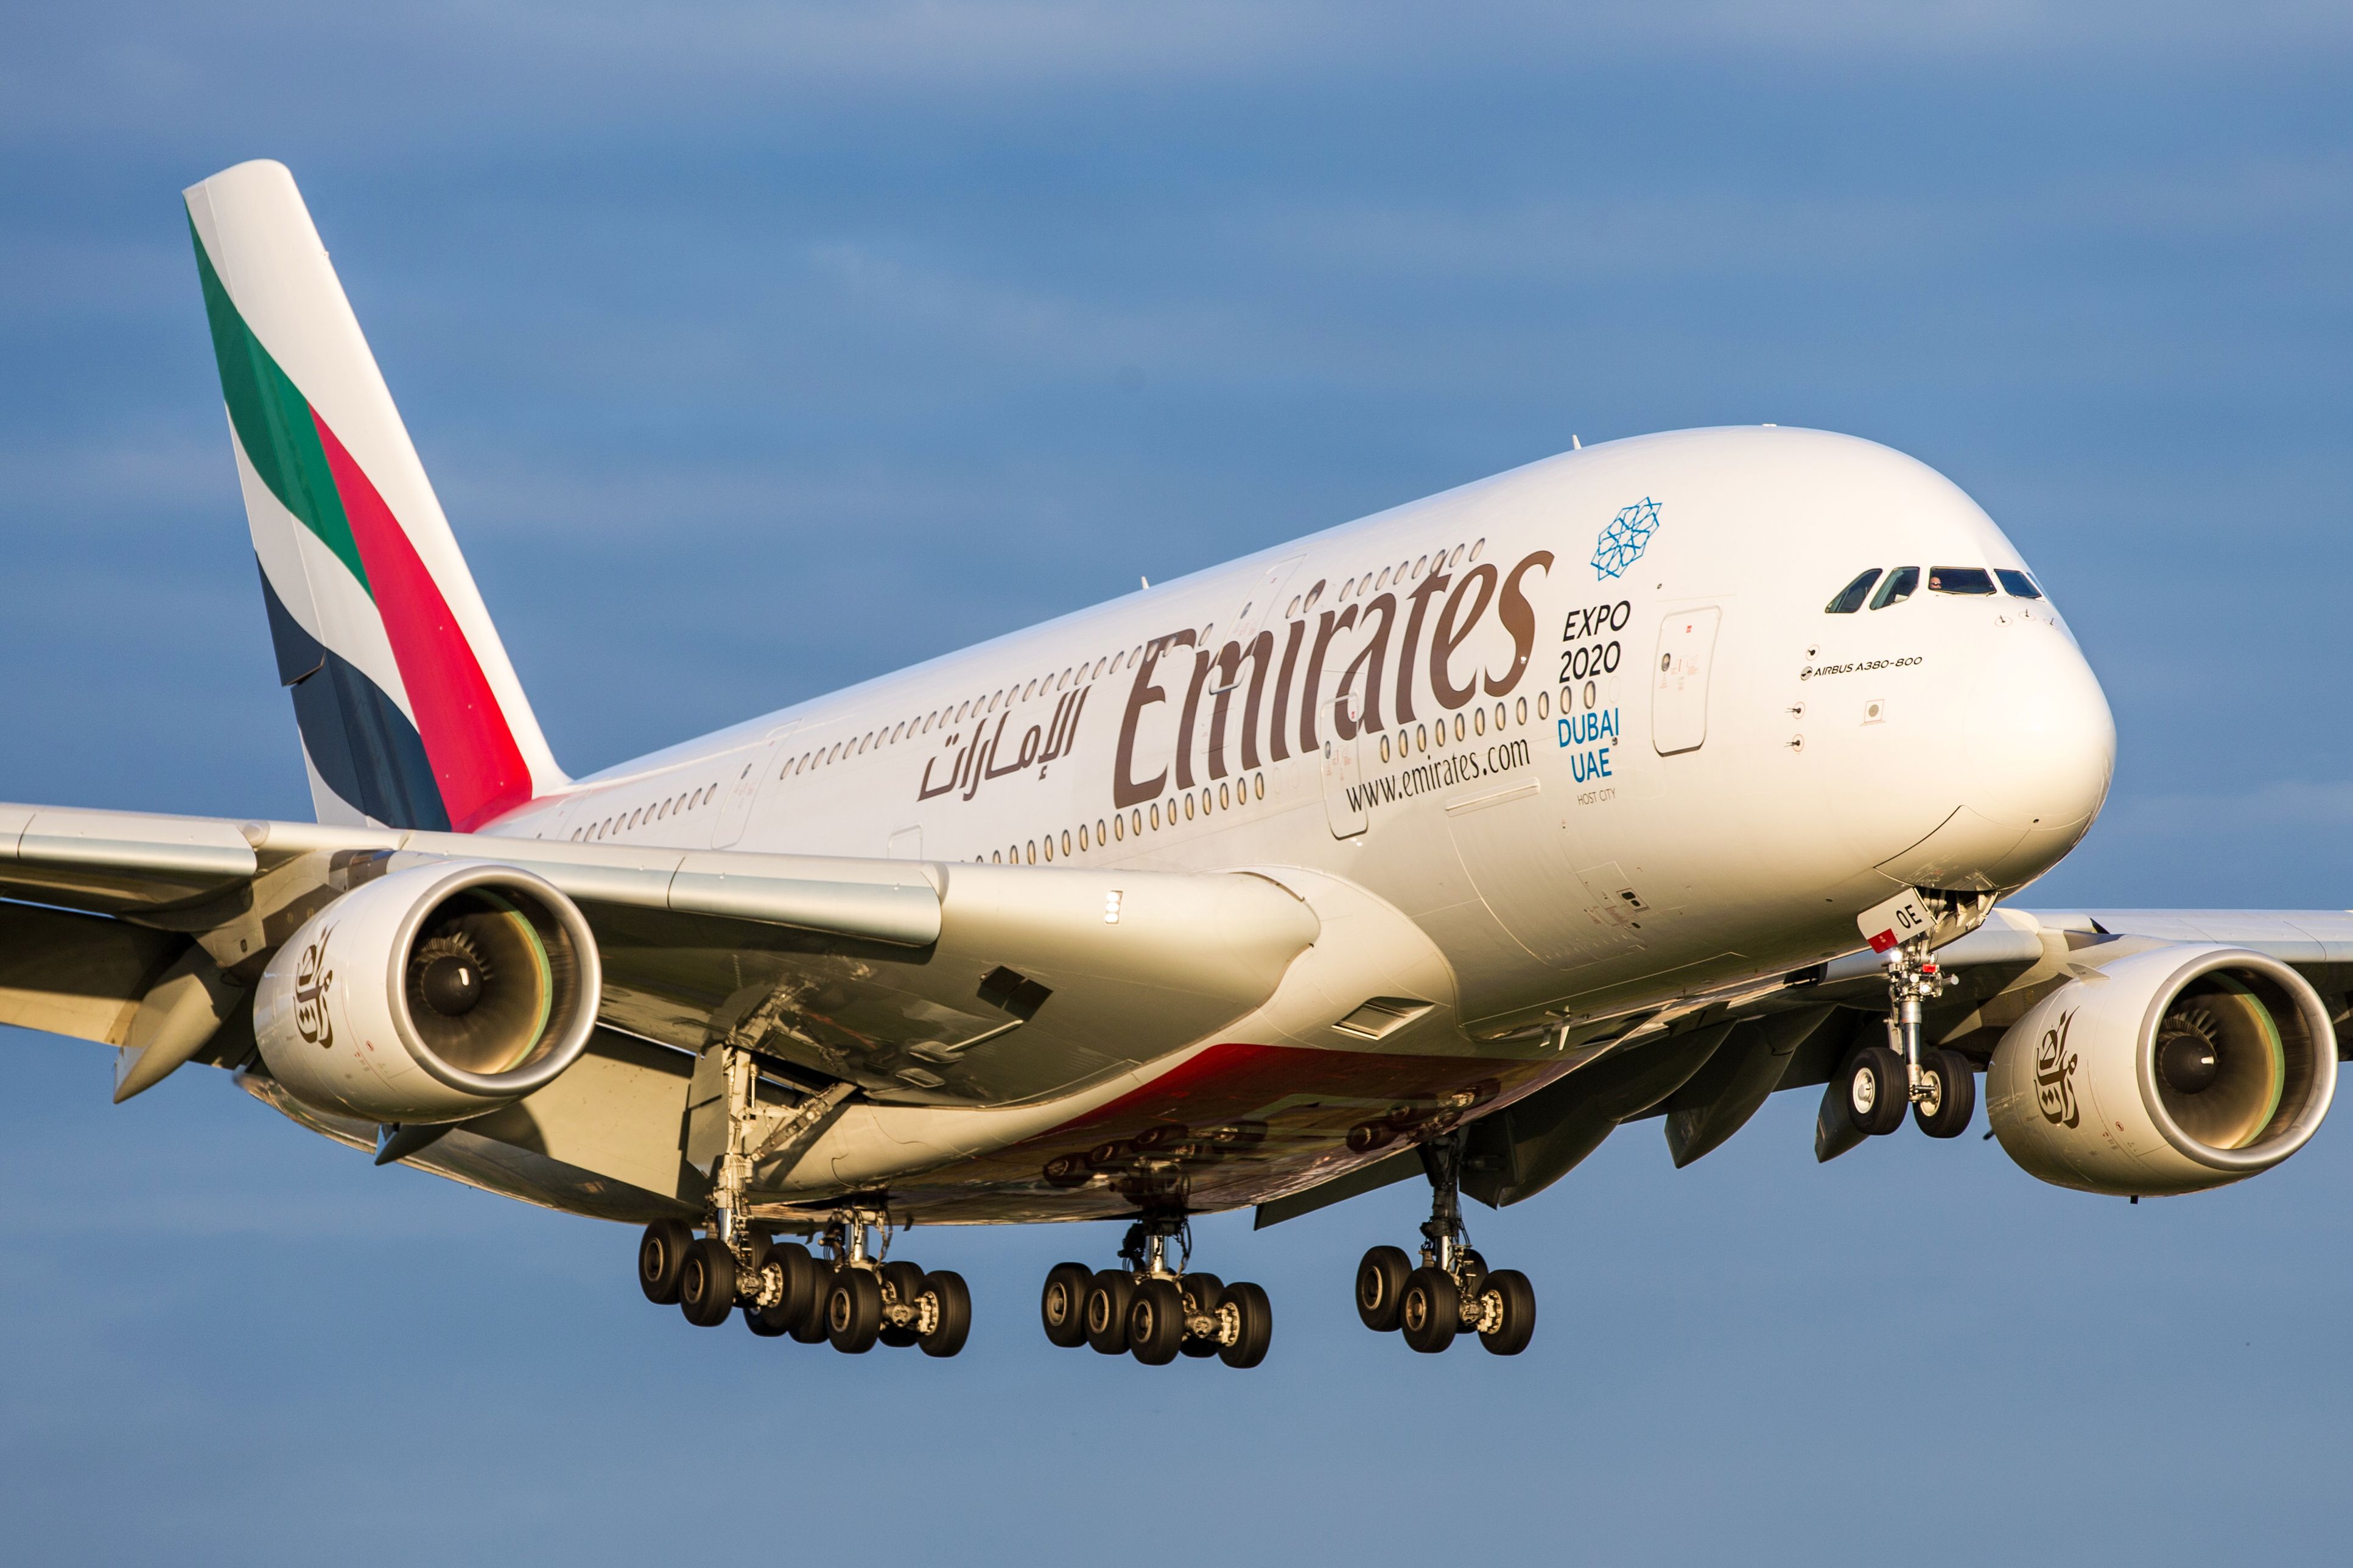 Updated A Quarantined Emirates Airline Plane Carrying Sick Passengers And Vanilla Ice Landed At Jfk Airport In New York City